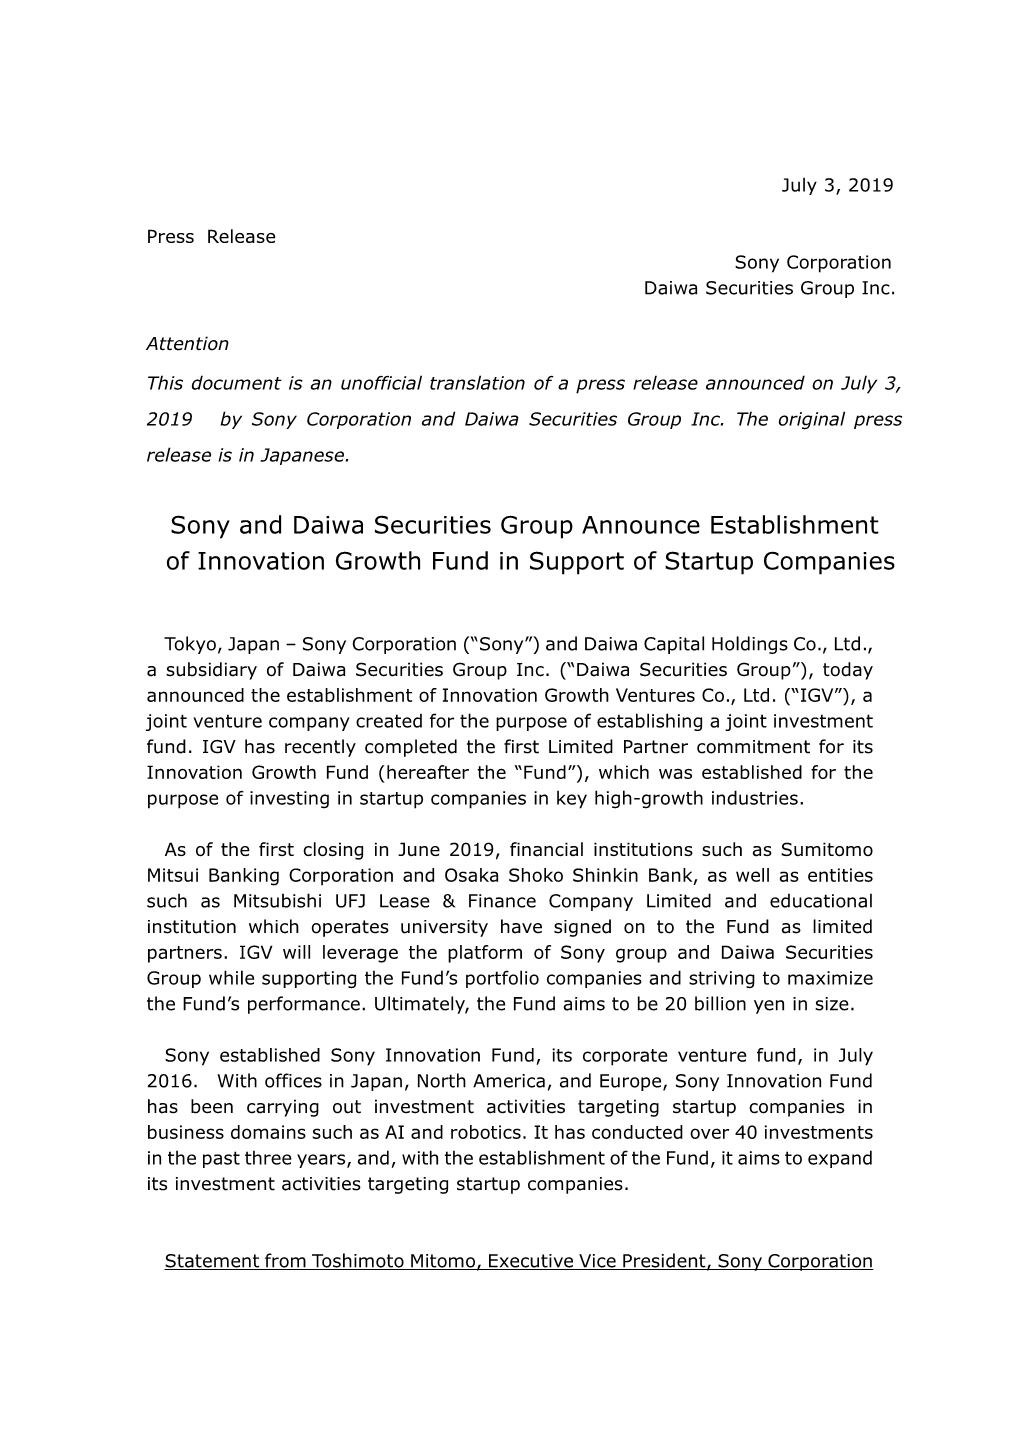 Sony and Daiwa Securities Group Announce Establishment of Innovation Growth Fund in Support of Startup Companies